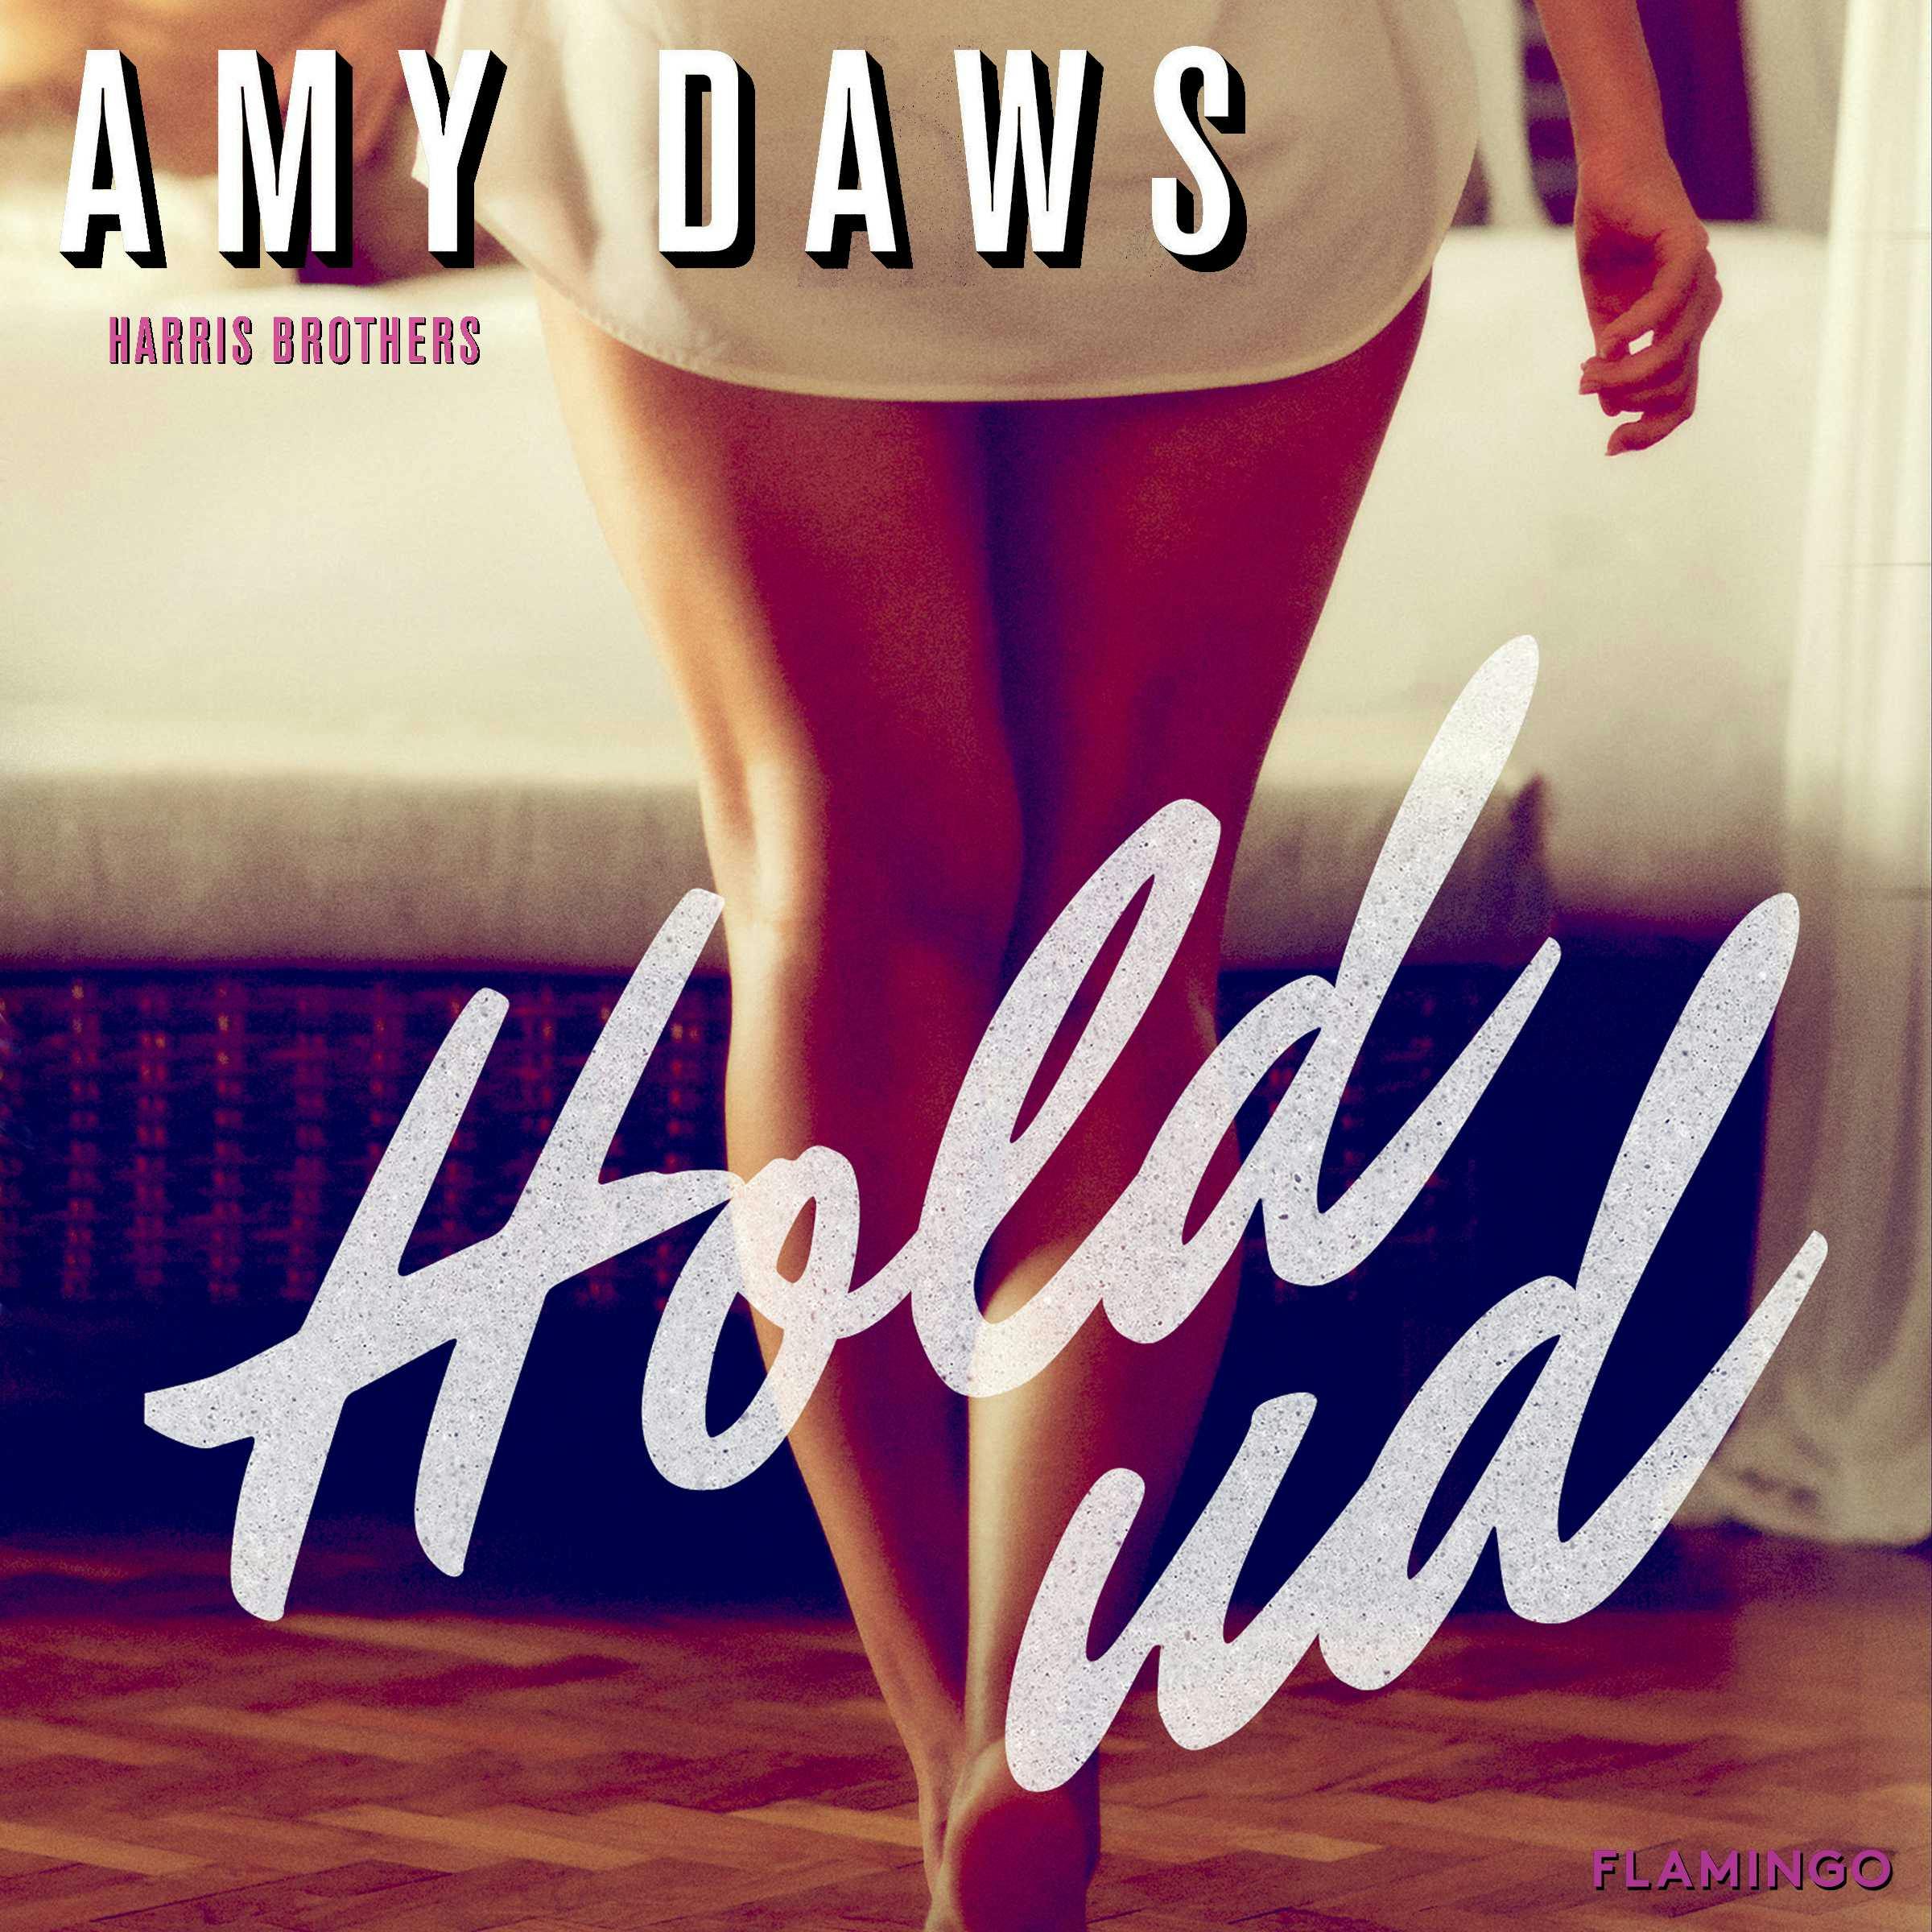 Hold ud - Amy Daws